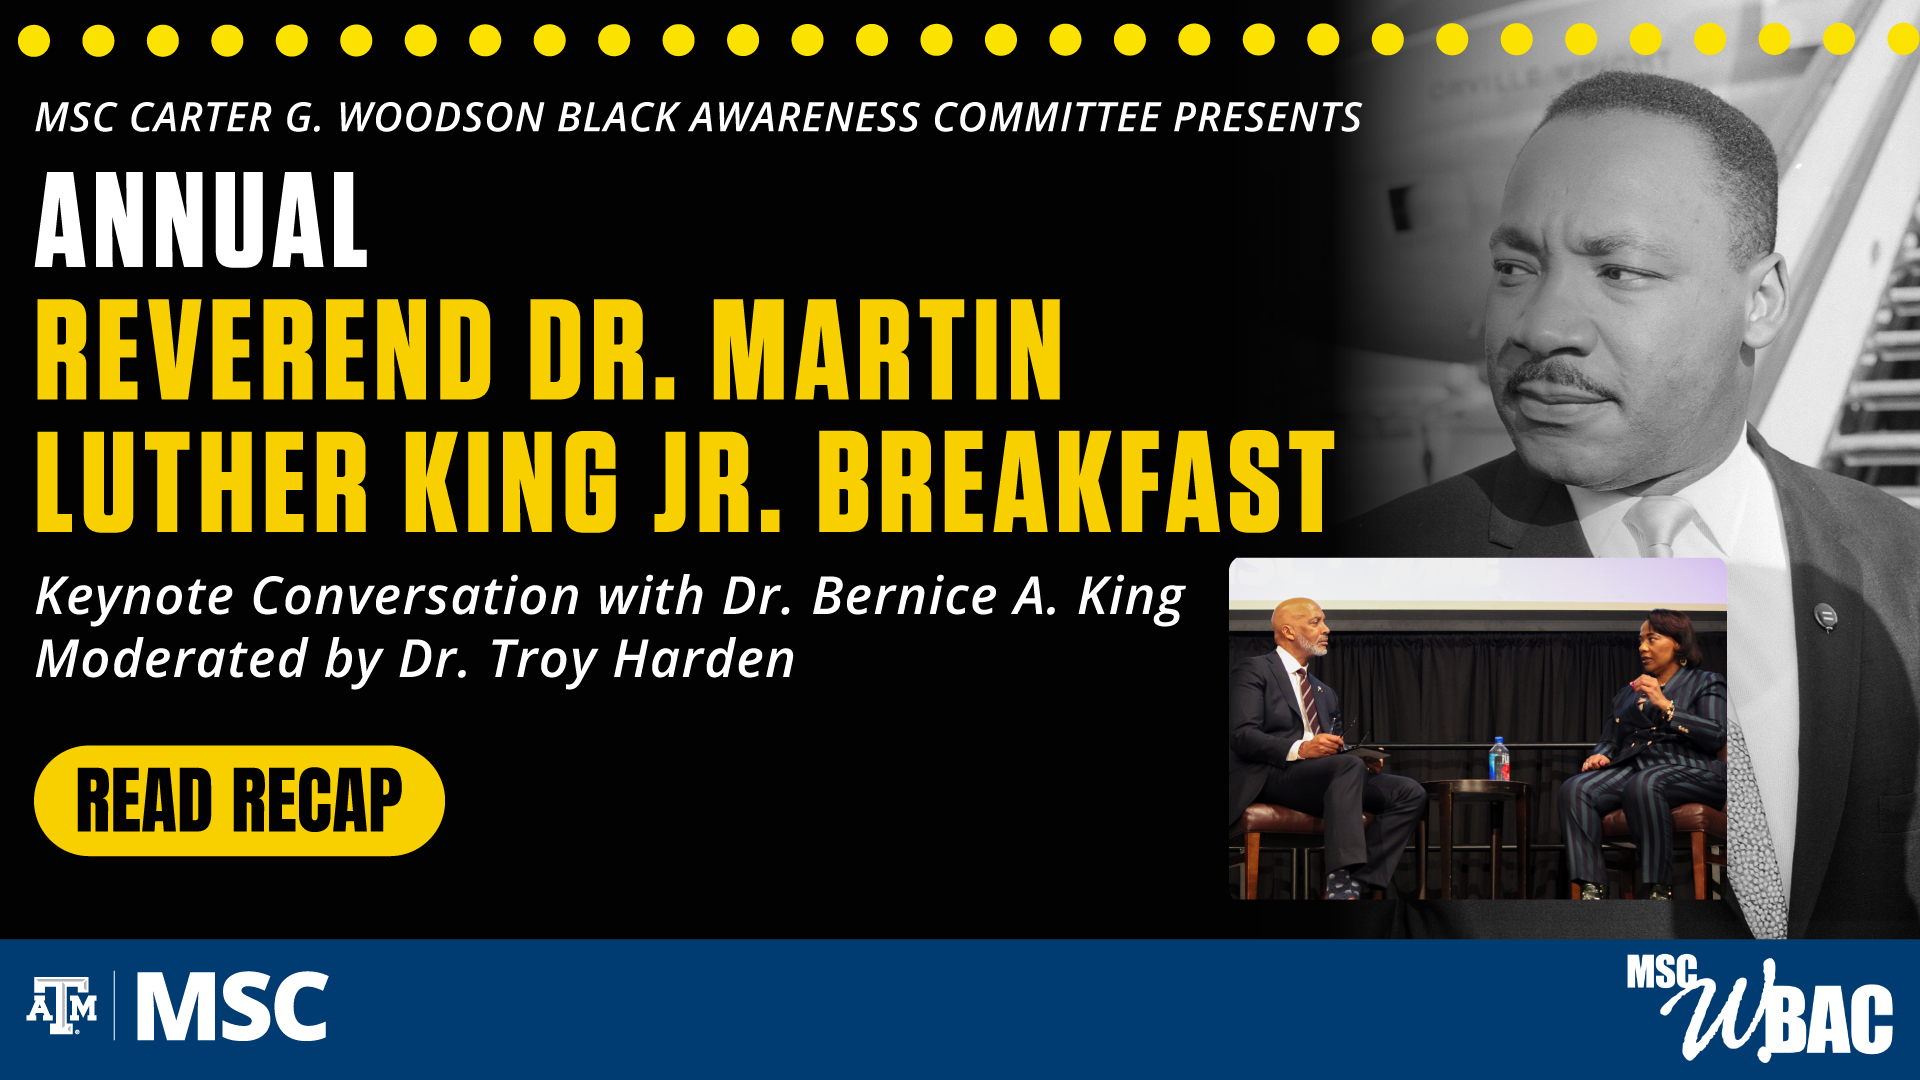 MSC Carter G. Woodson Black Awareness Committee Presents: Annual Reverend Dr. Martin Luther King Jr. Breakfast. Keynote Conversation with Dr. Bernice A. King, Moderated by Dr. Troy Harden Recap